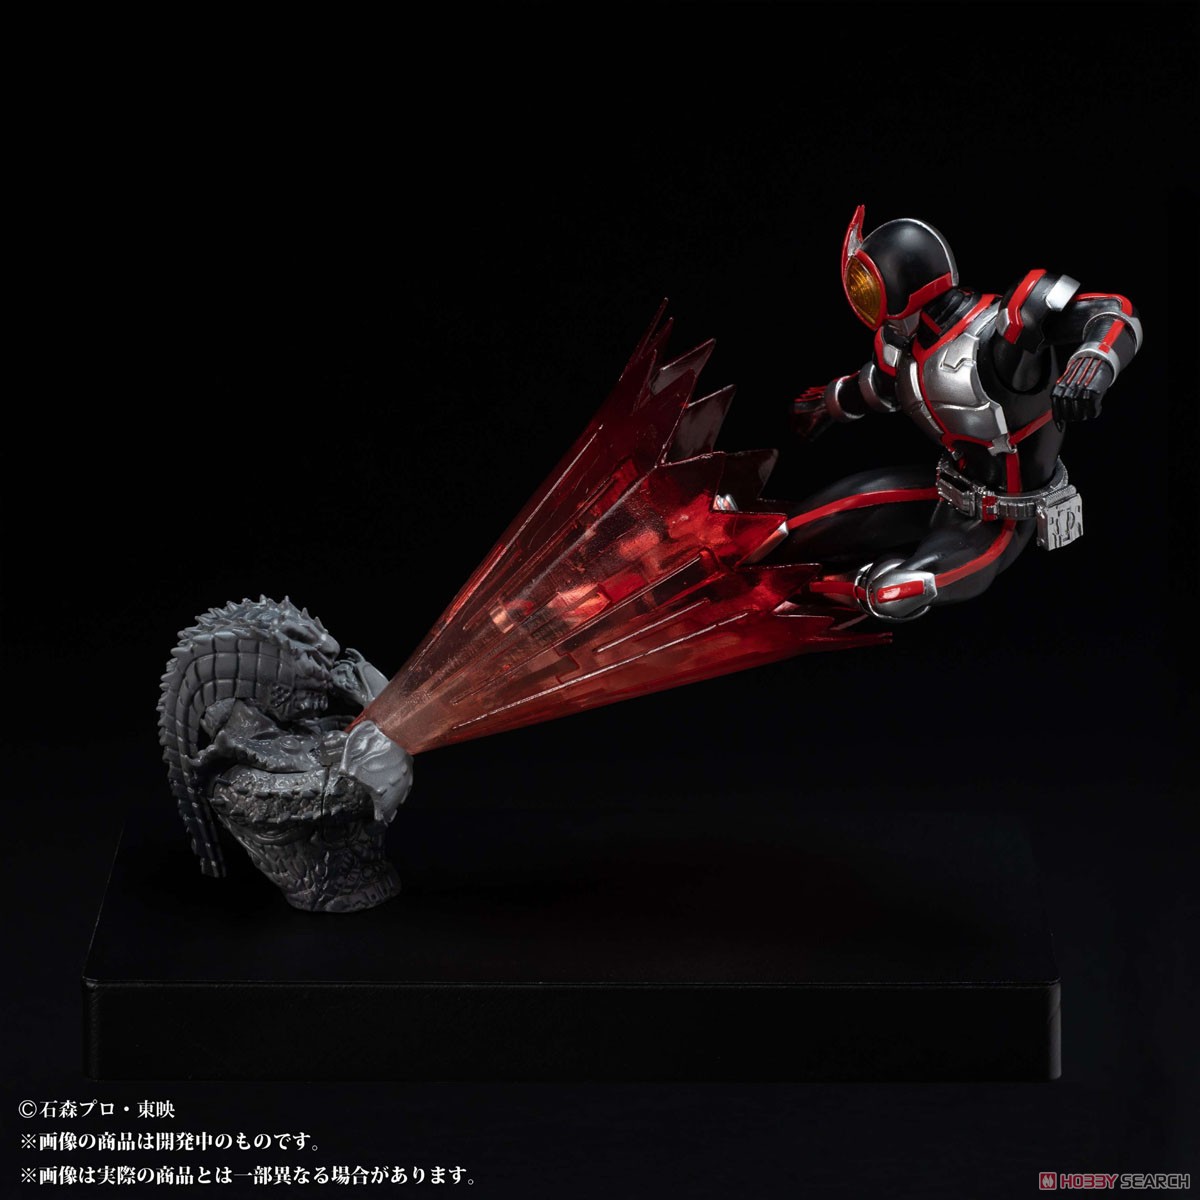 Glow In The Dark『仮面ライダーファイズ』仮面ライダー555 完成品フィギュア-003